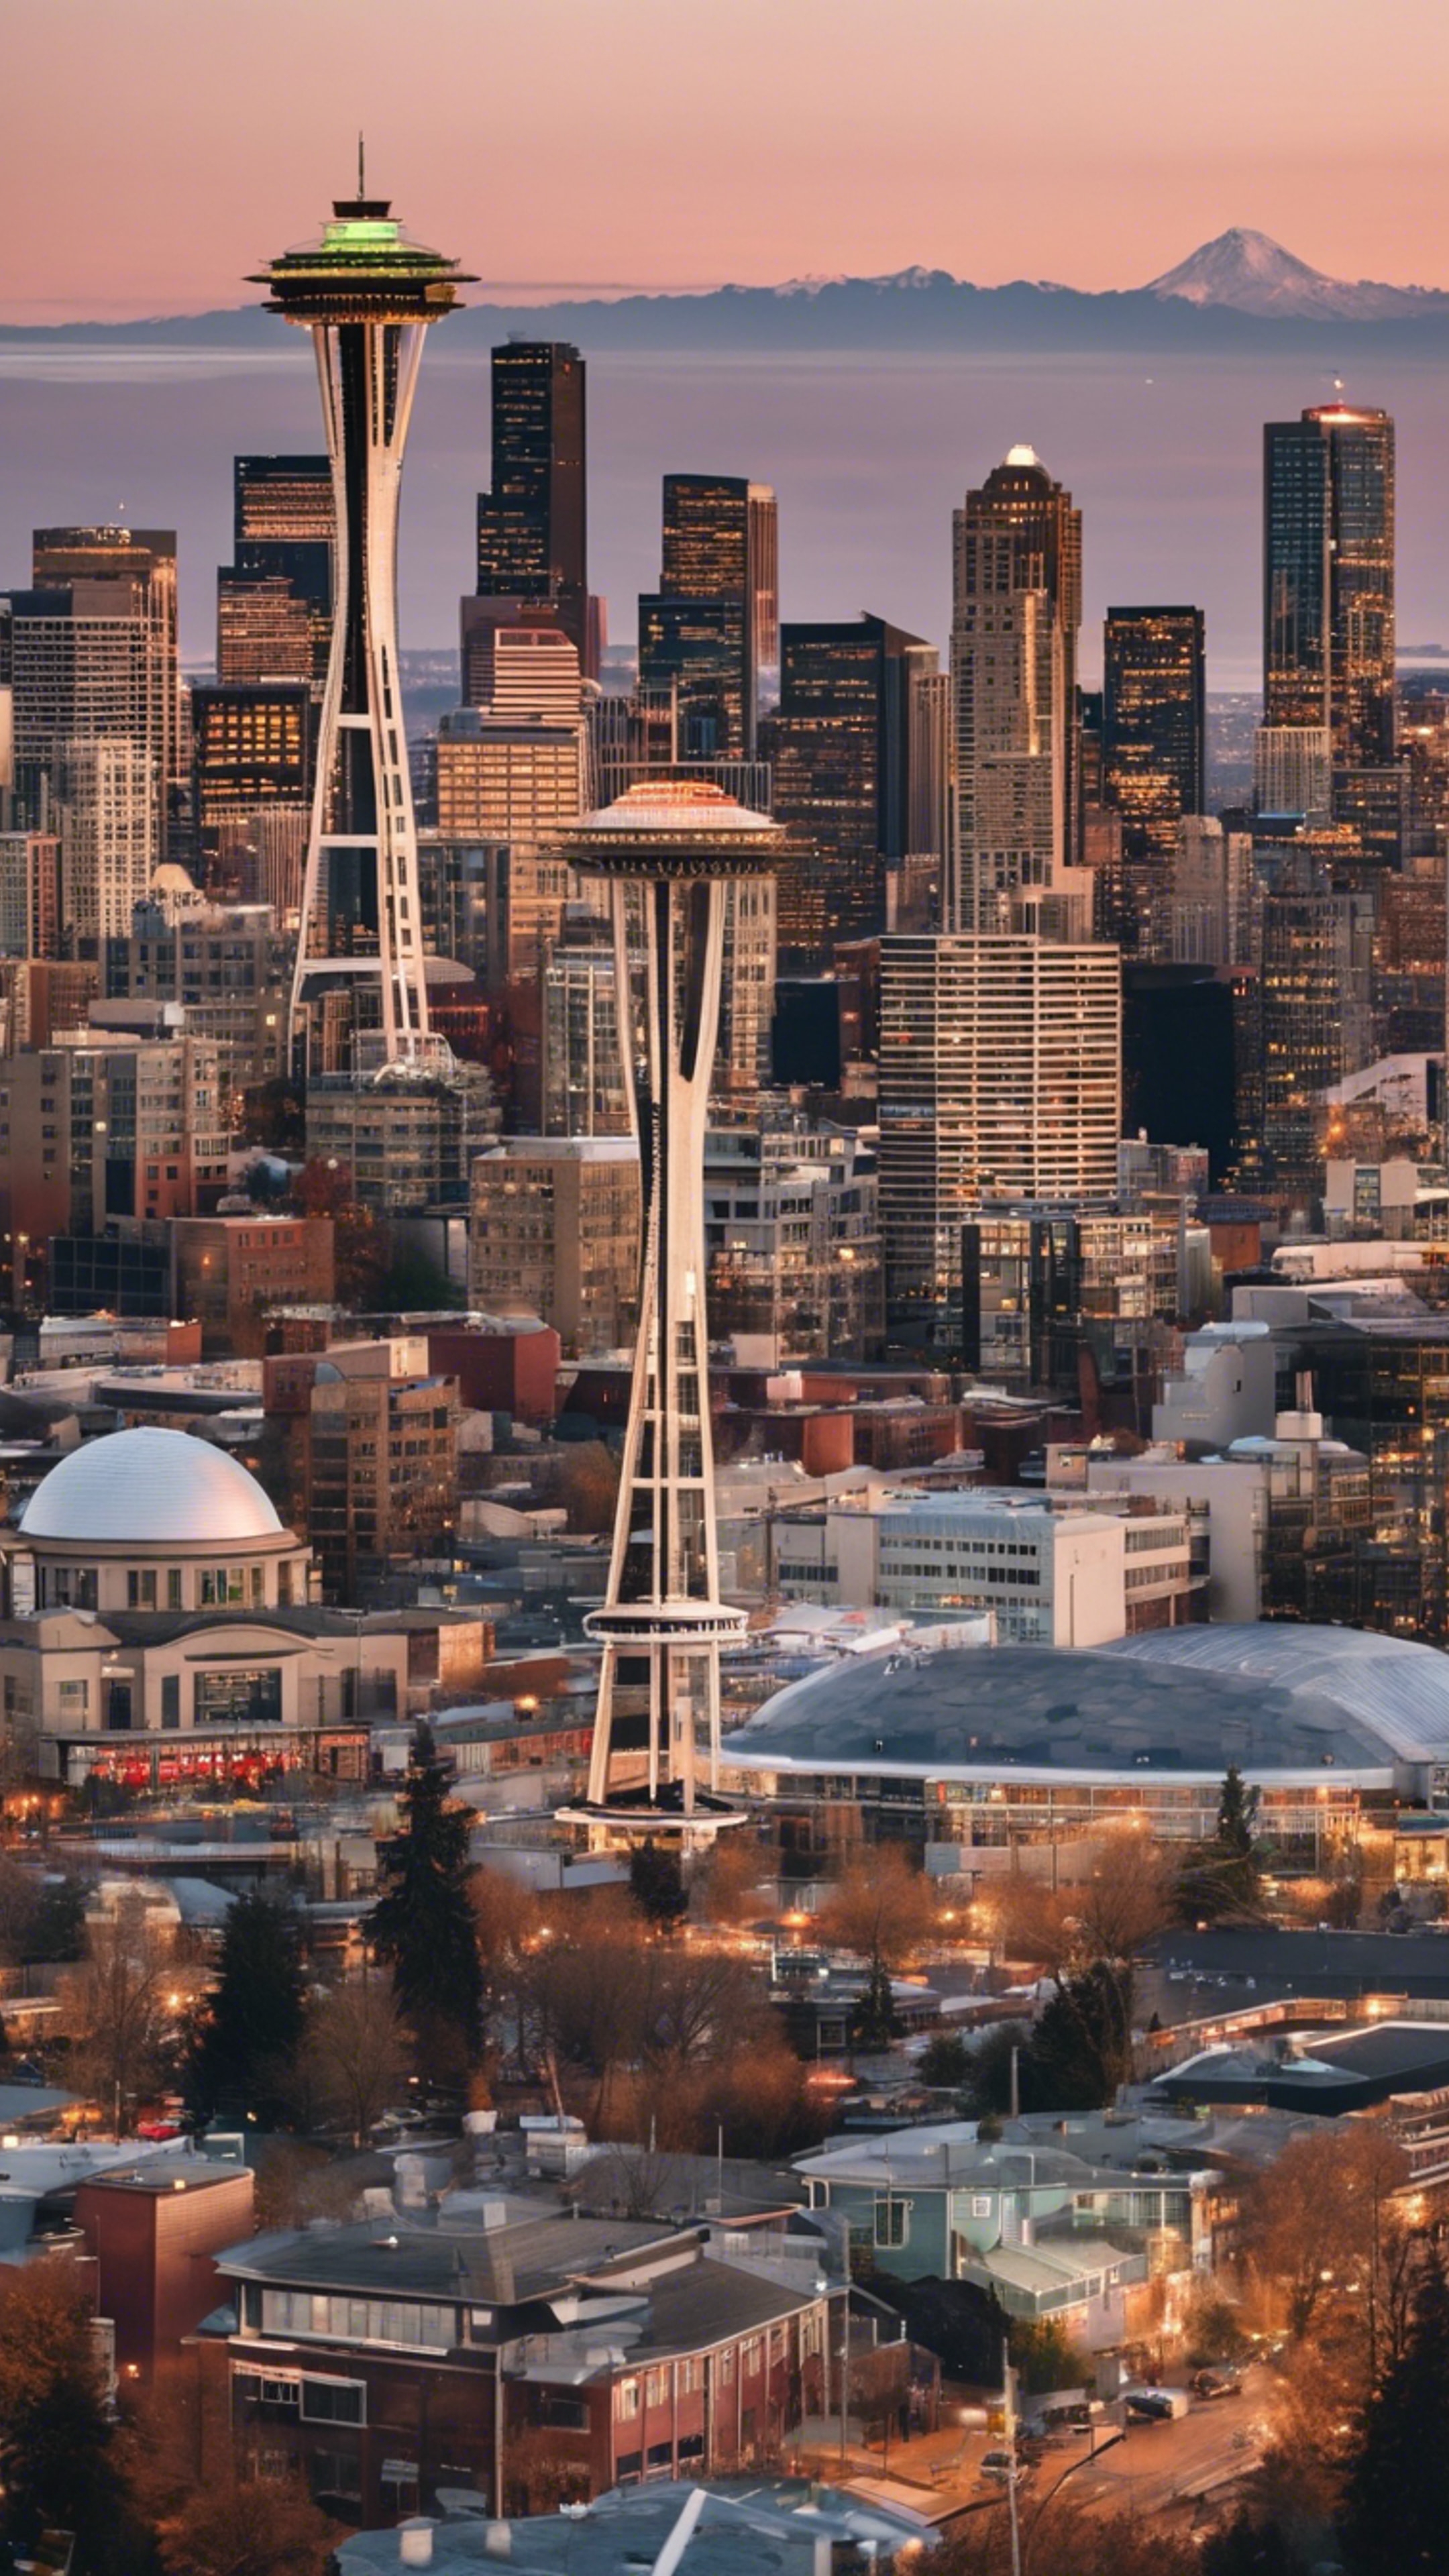 A stunning panorama of the Seattle skyline, accentuated by the unique Space Needle.壁紙[ff35fb40bc5141bebb90]